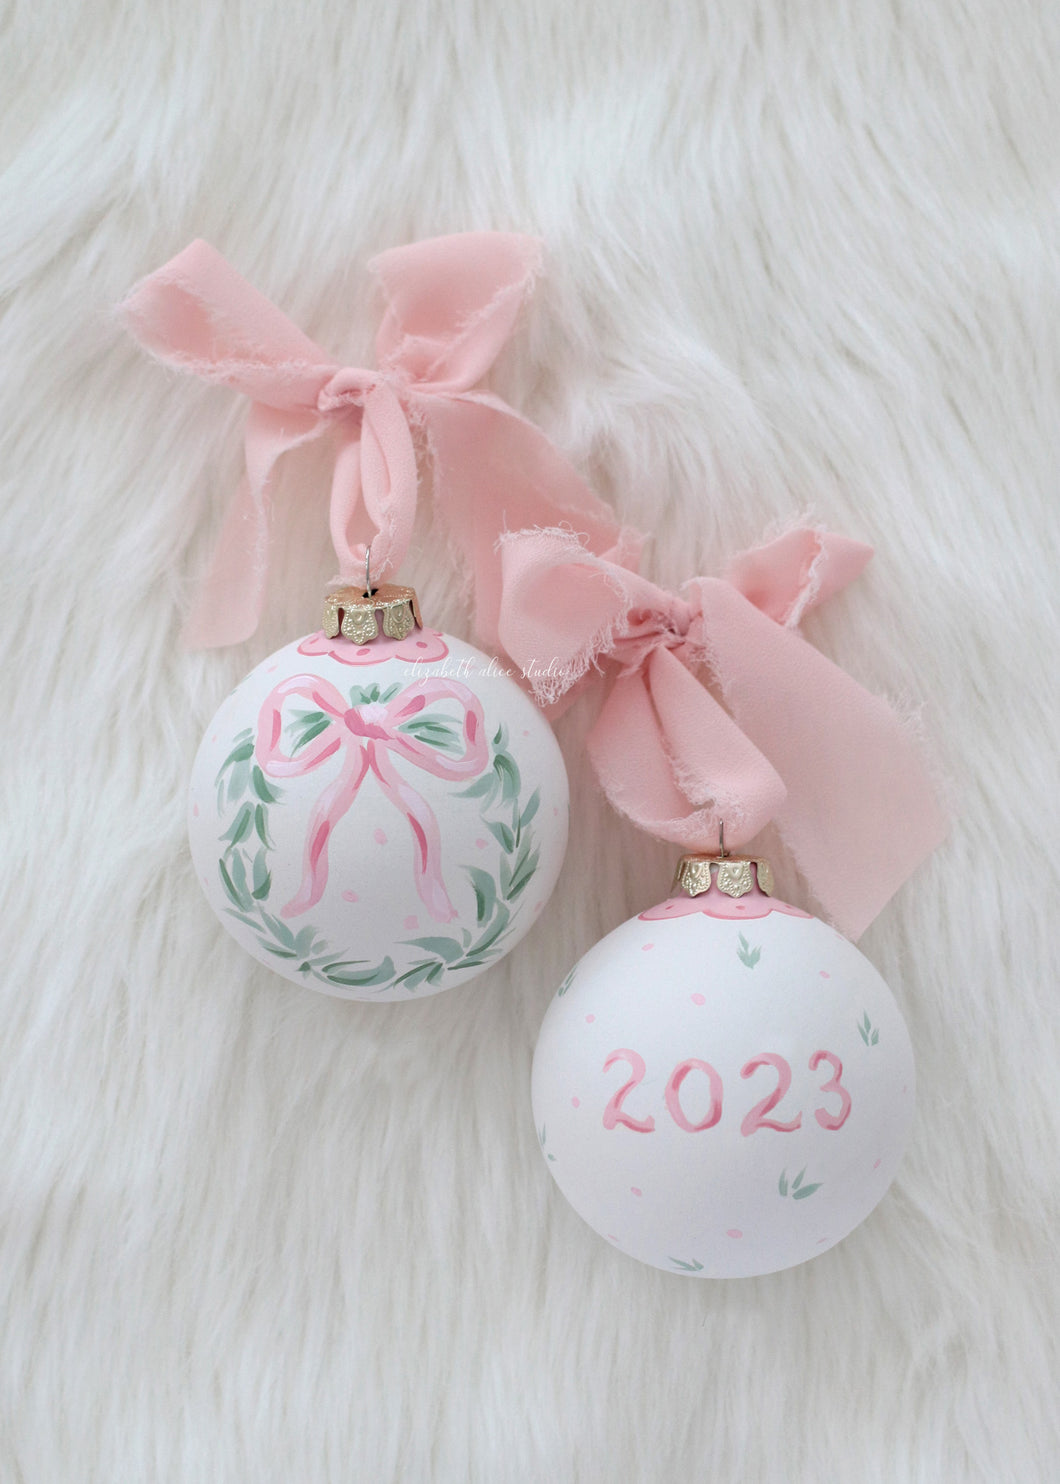 Pink bow 2023 hand-painted ornament